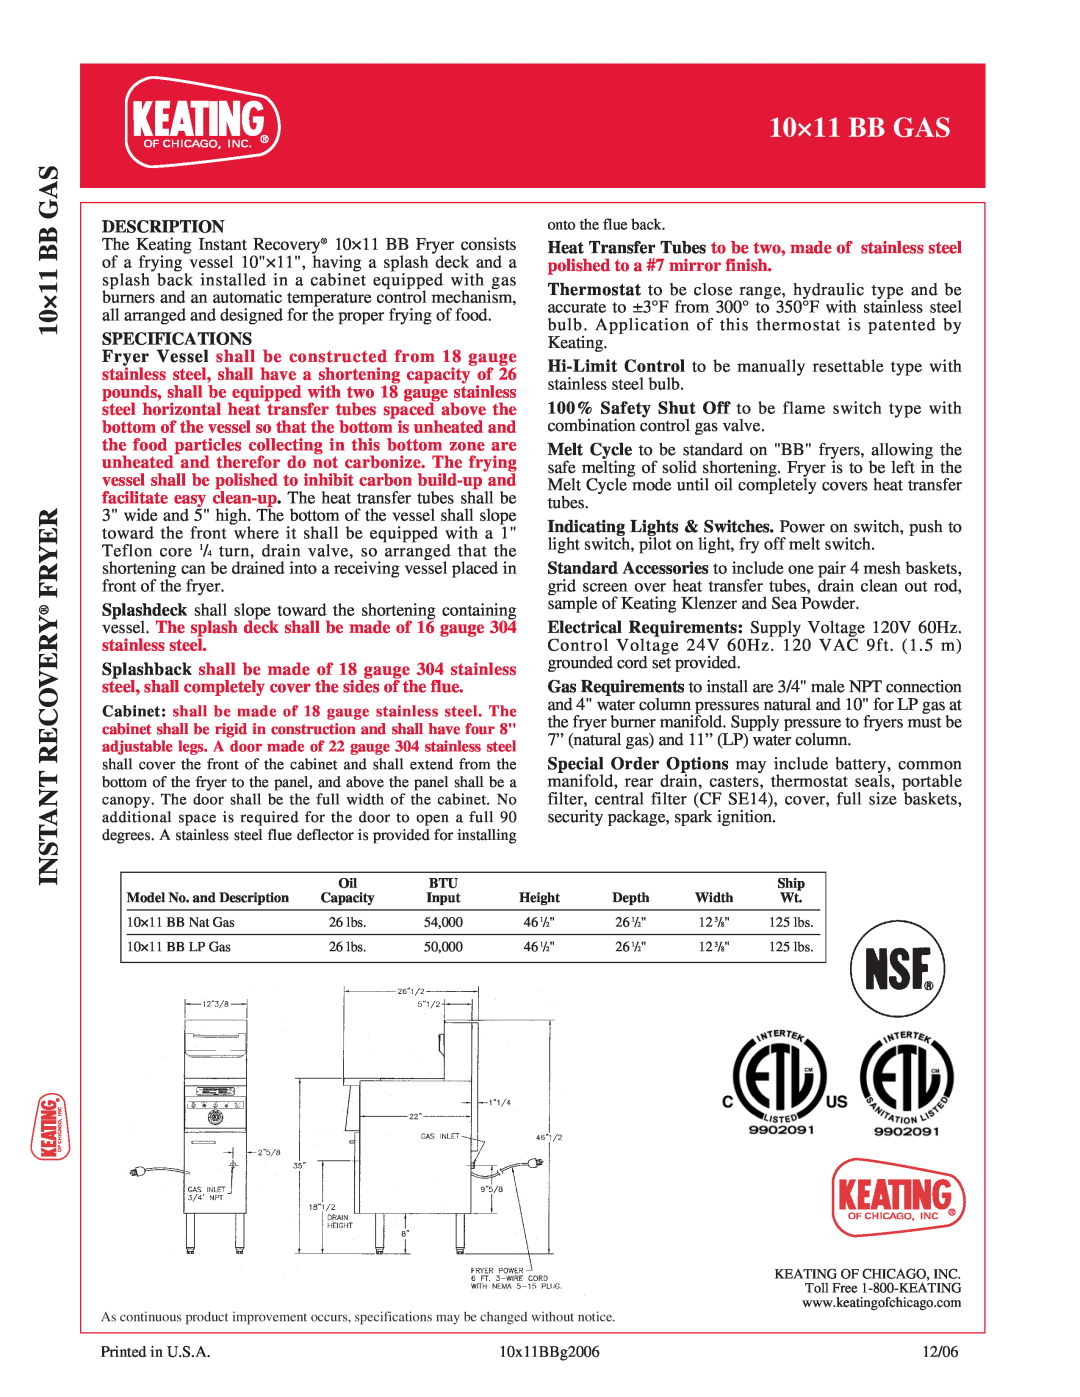 Keating Of Chicago 10x11 BB Gas manual 10×11 BB GAS INSTANT RECOVERY FRYER, Description, Specifications 